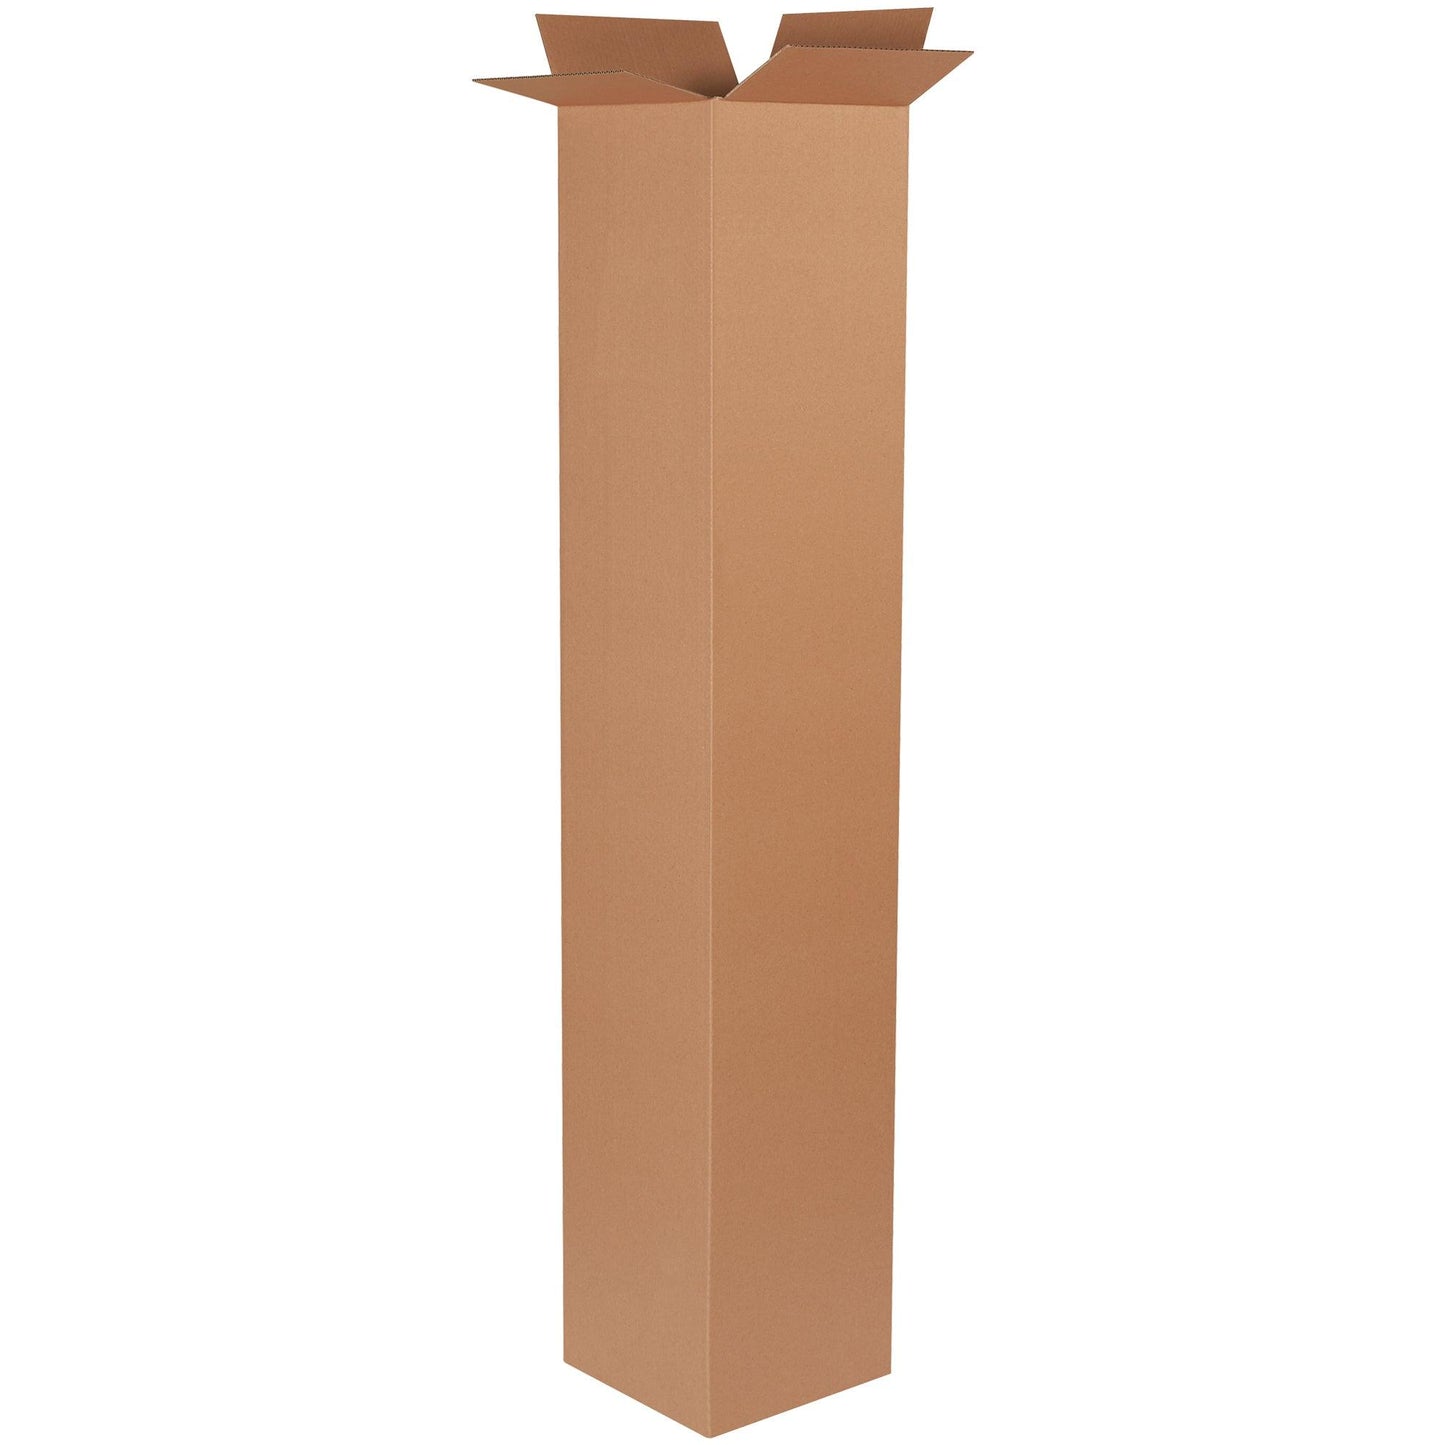 12 x 12 x 72" Tall Corrugated Boxes - 121272